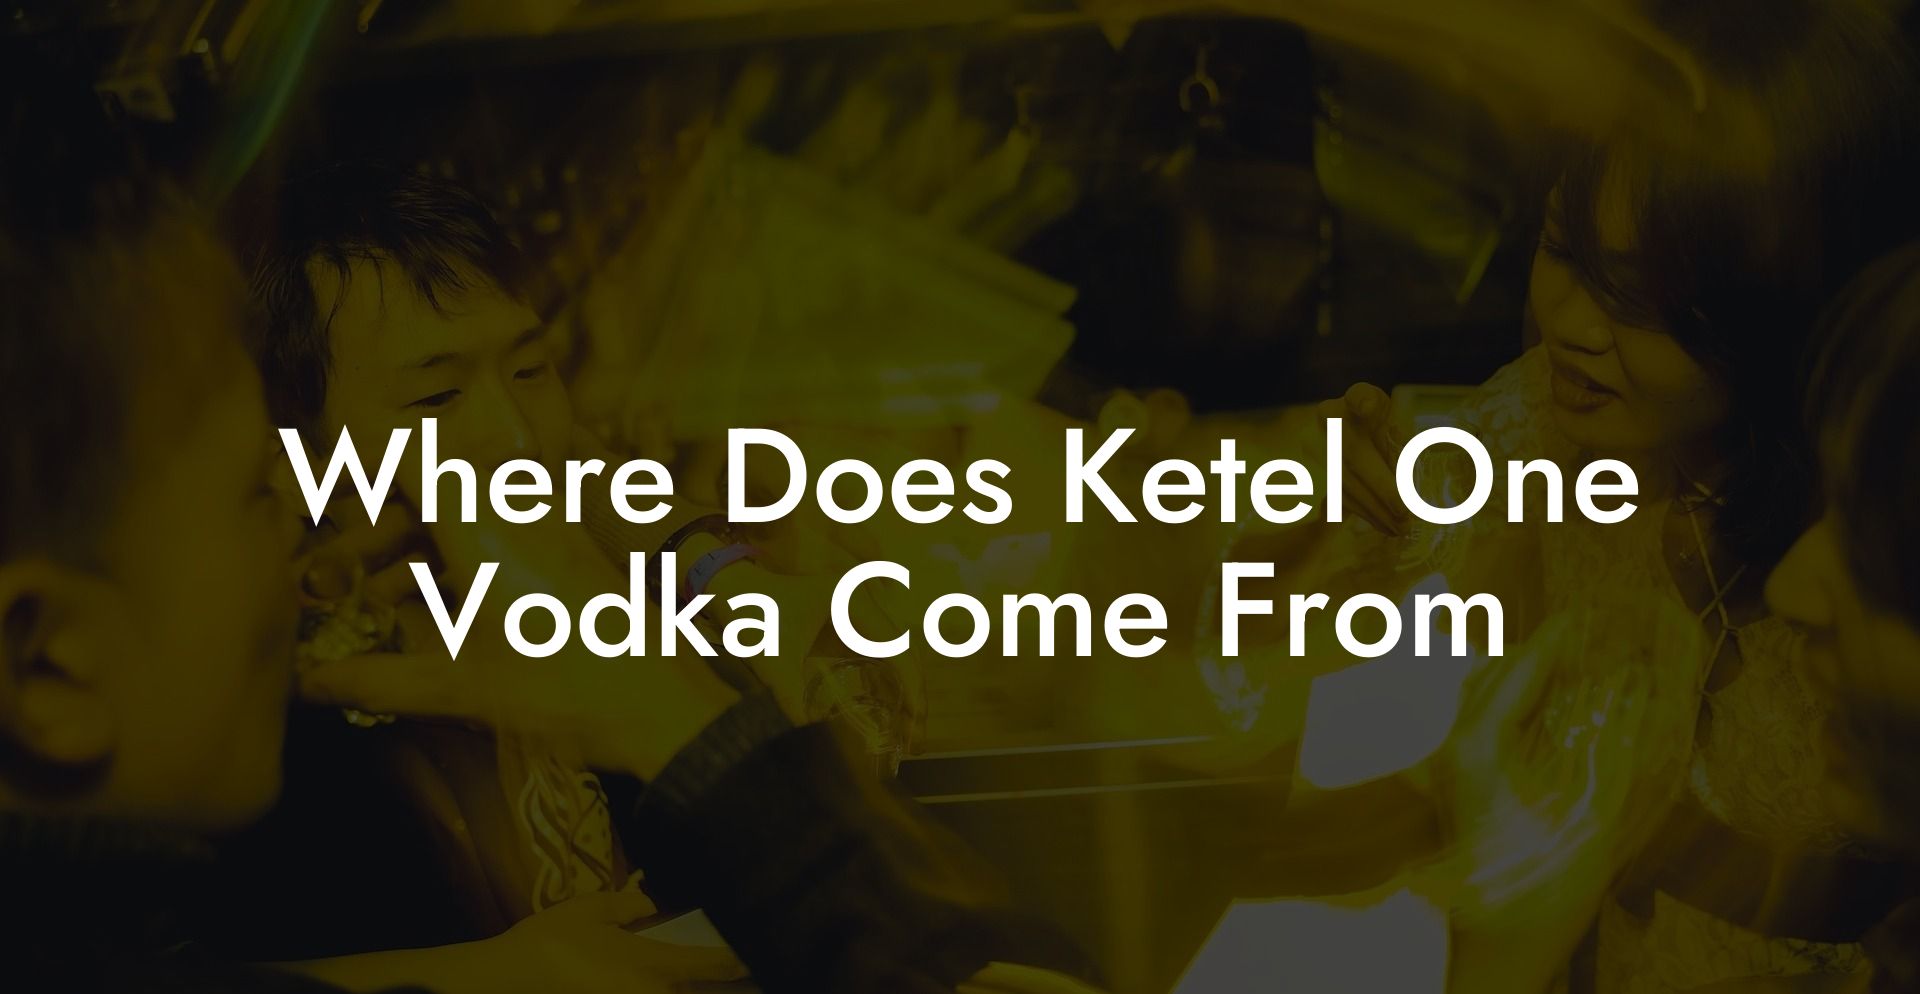 Where Does Ketel One Vodka Come From